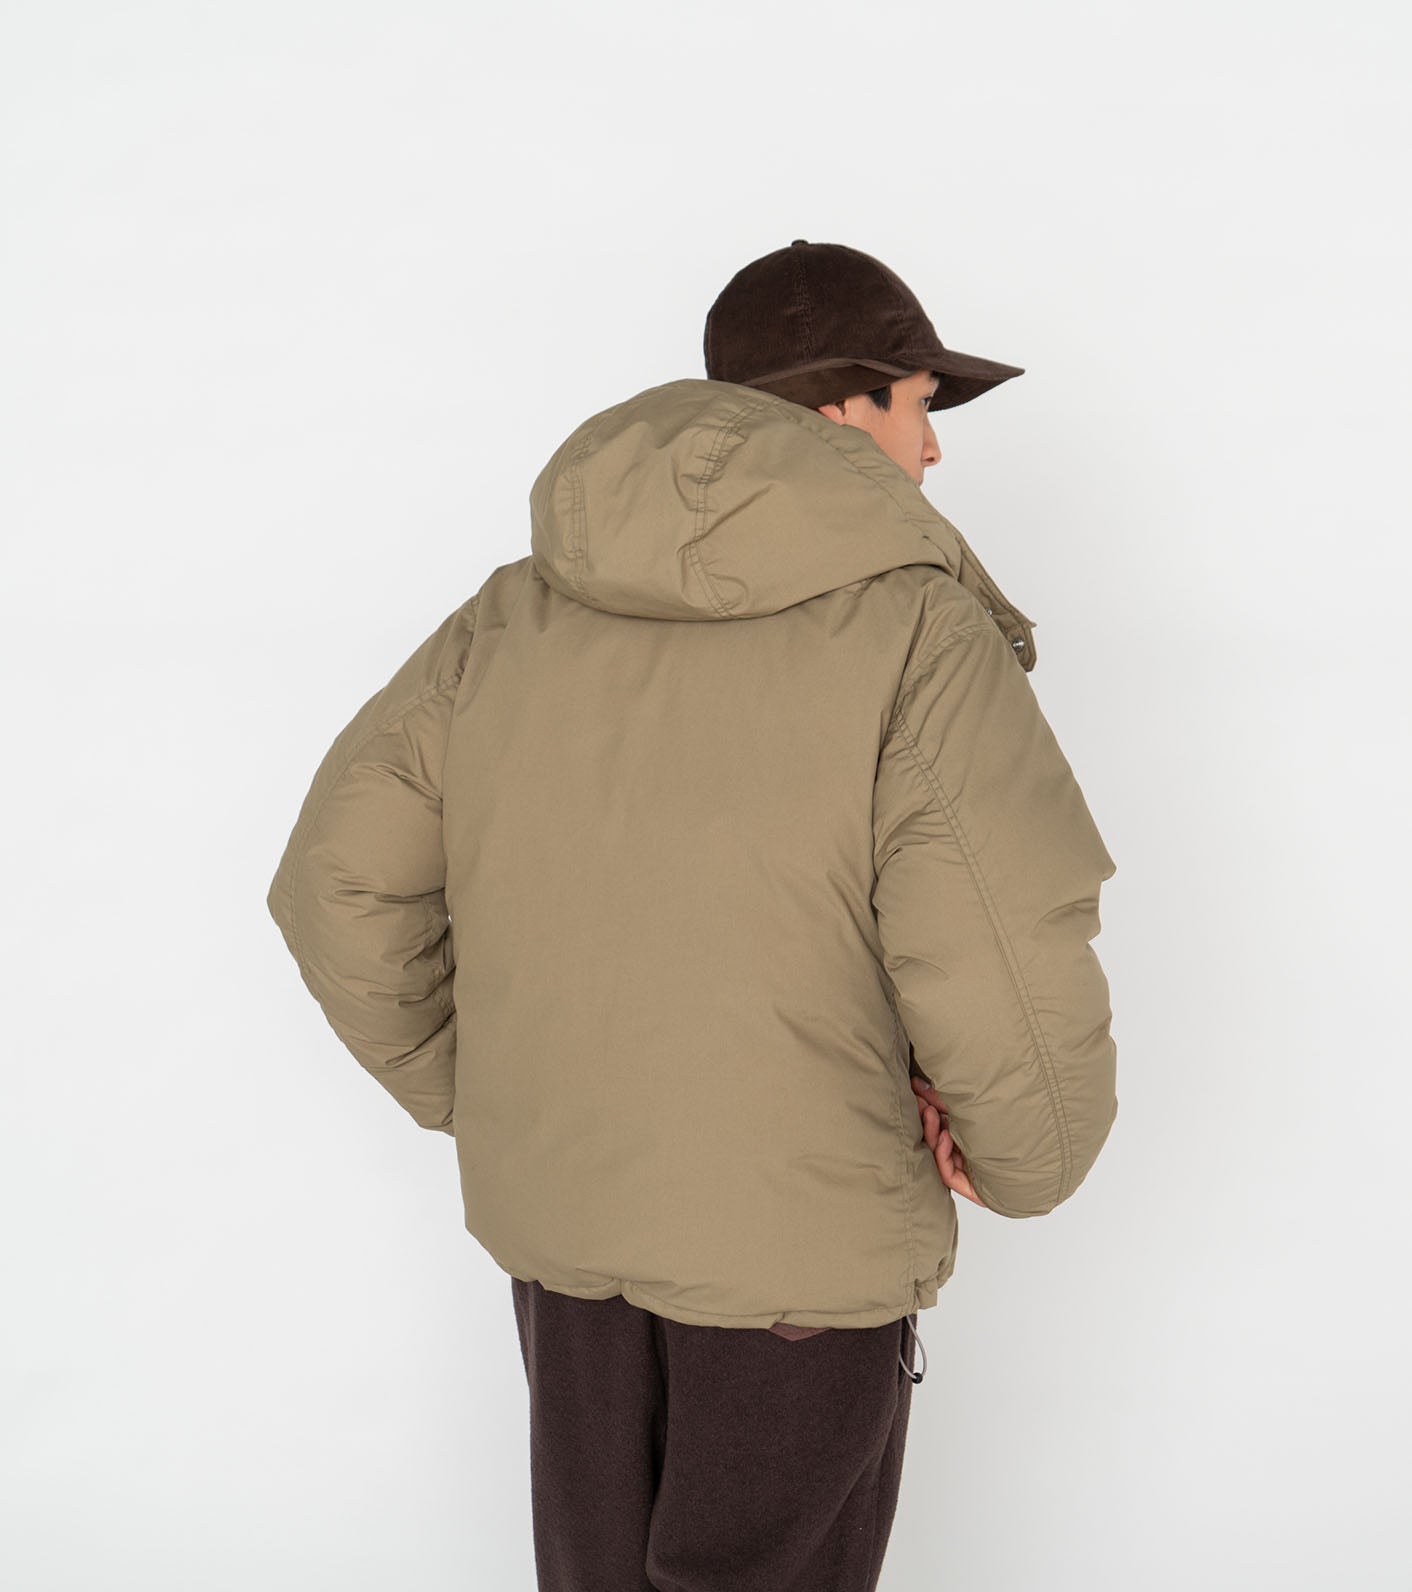 THE NORTH FACE PURPLE LABEL 65/35 Mountain Short Down Parka